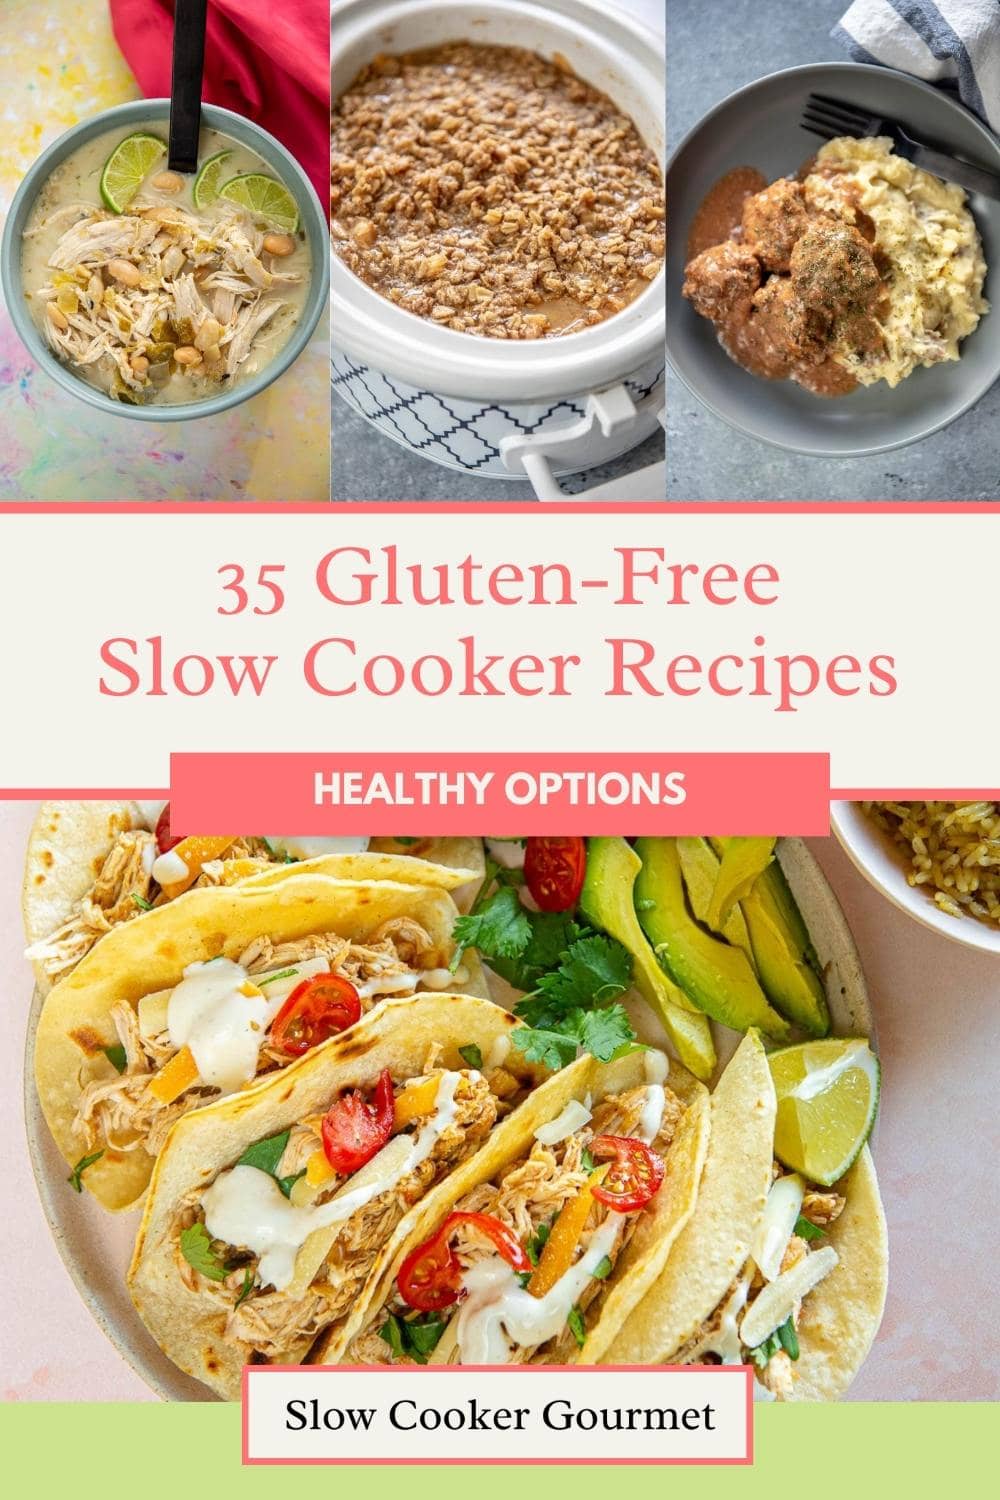 35 Gluten-Free Slow Cooker Recipes